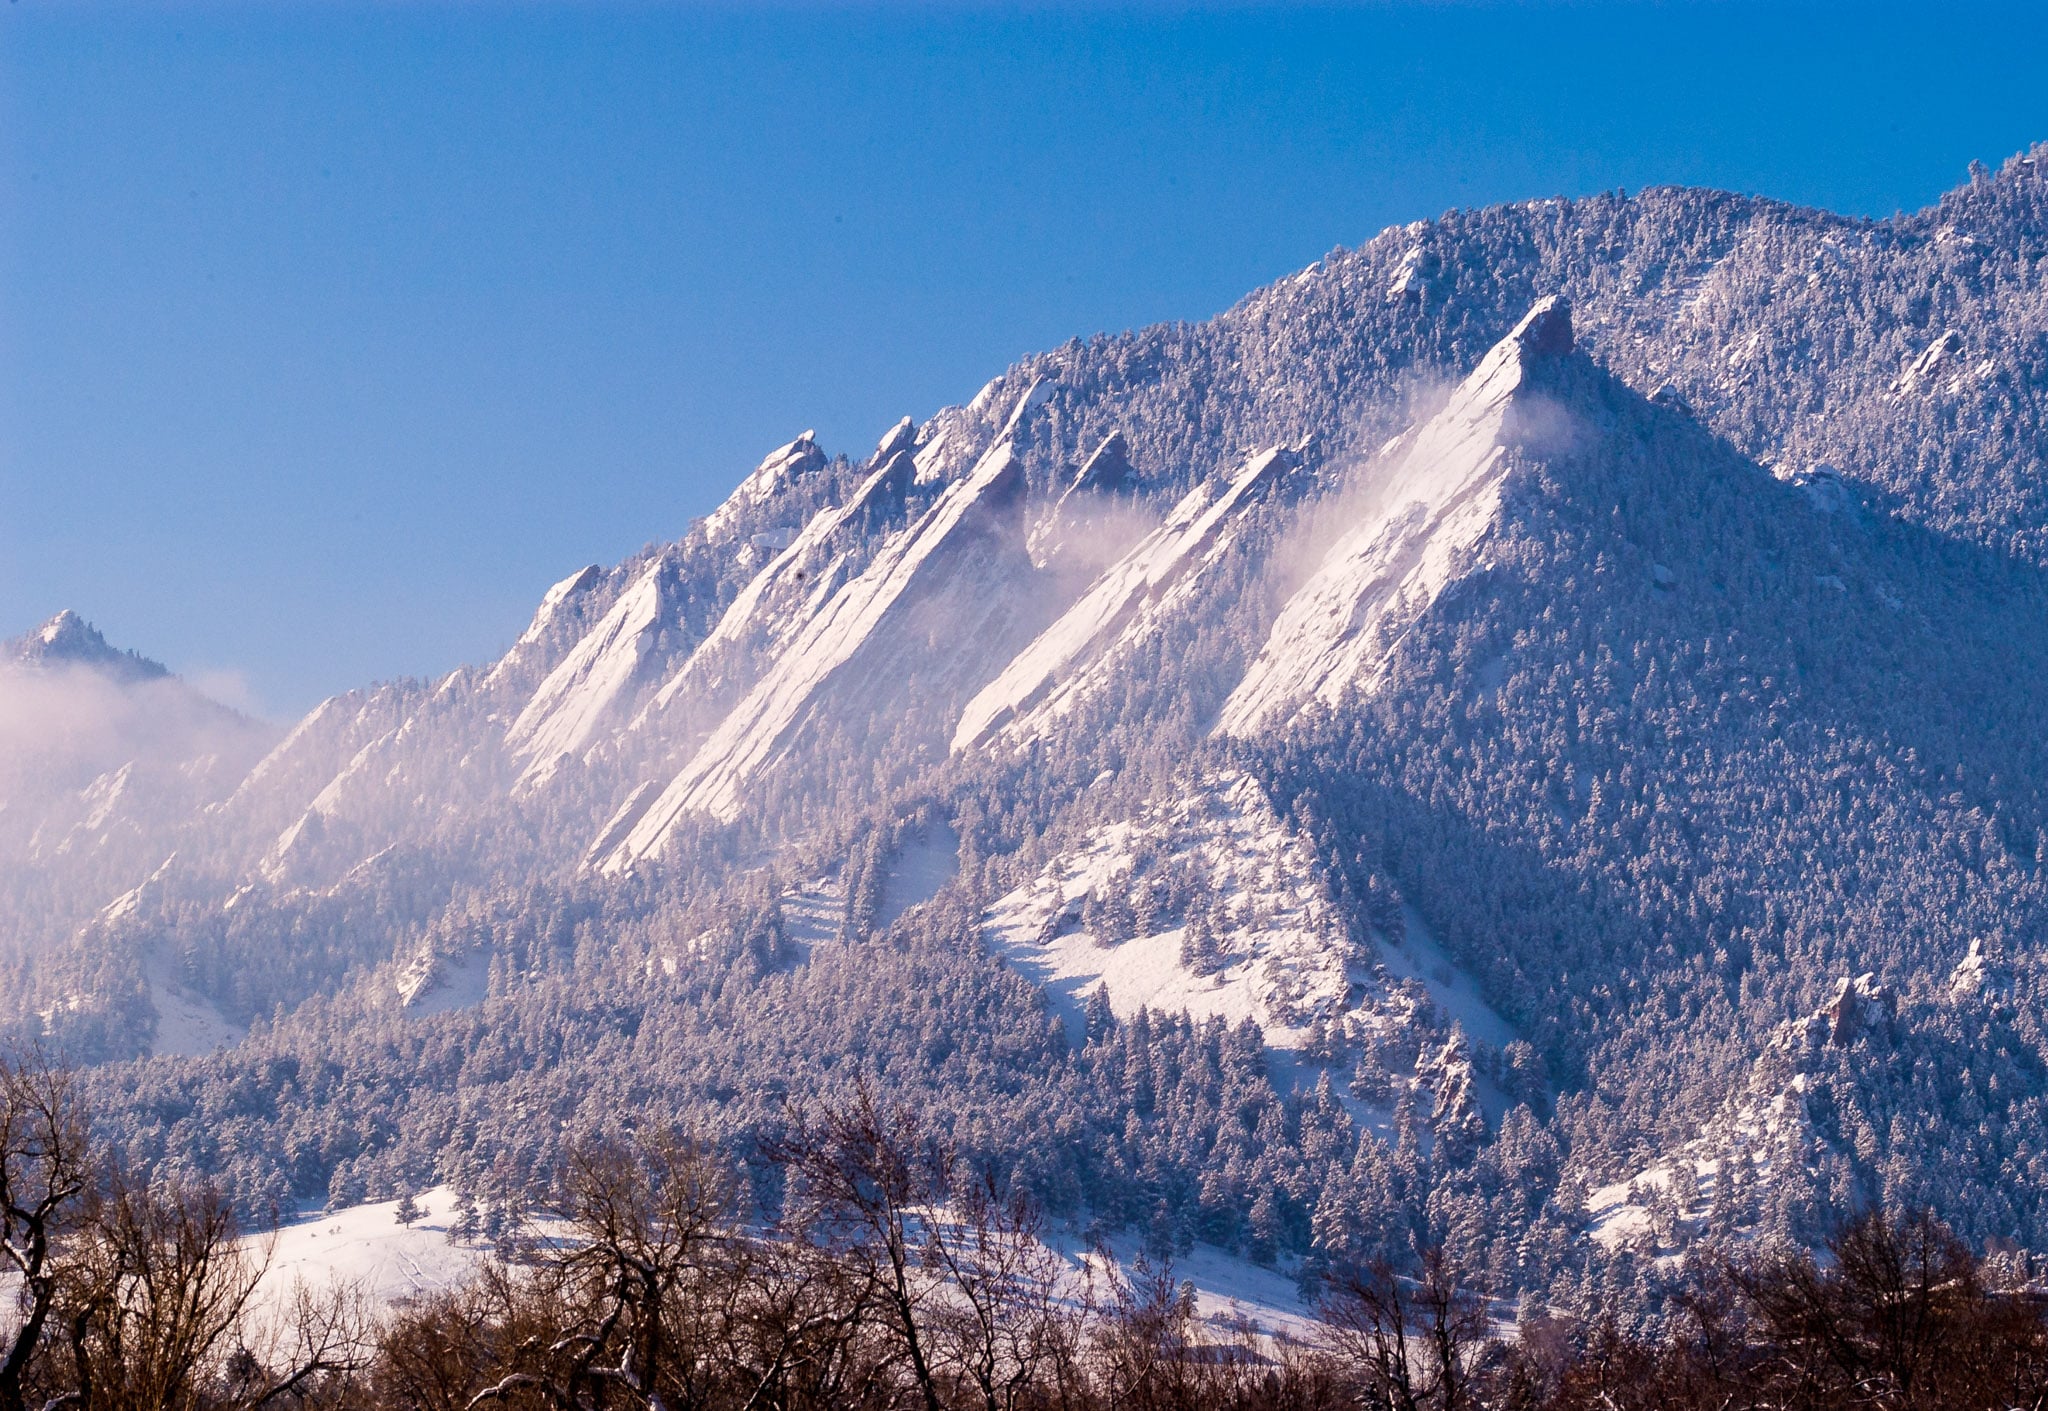 Snow dusts the Flatirons on a cold morning in Boulder, Colorado.